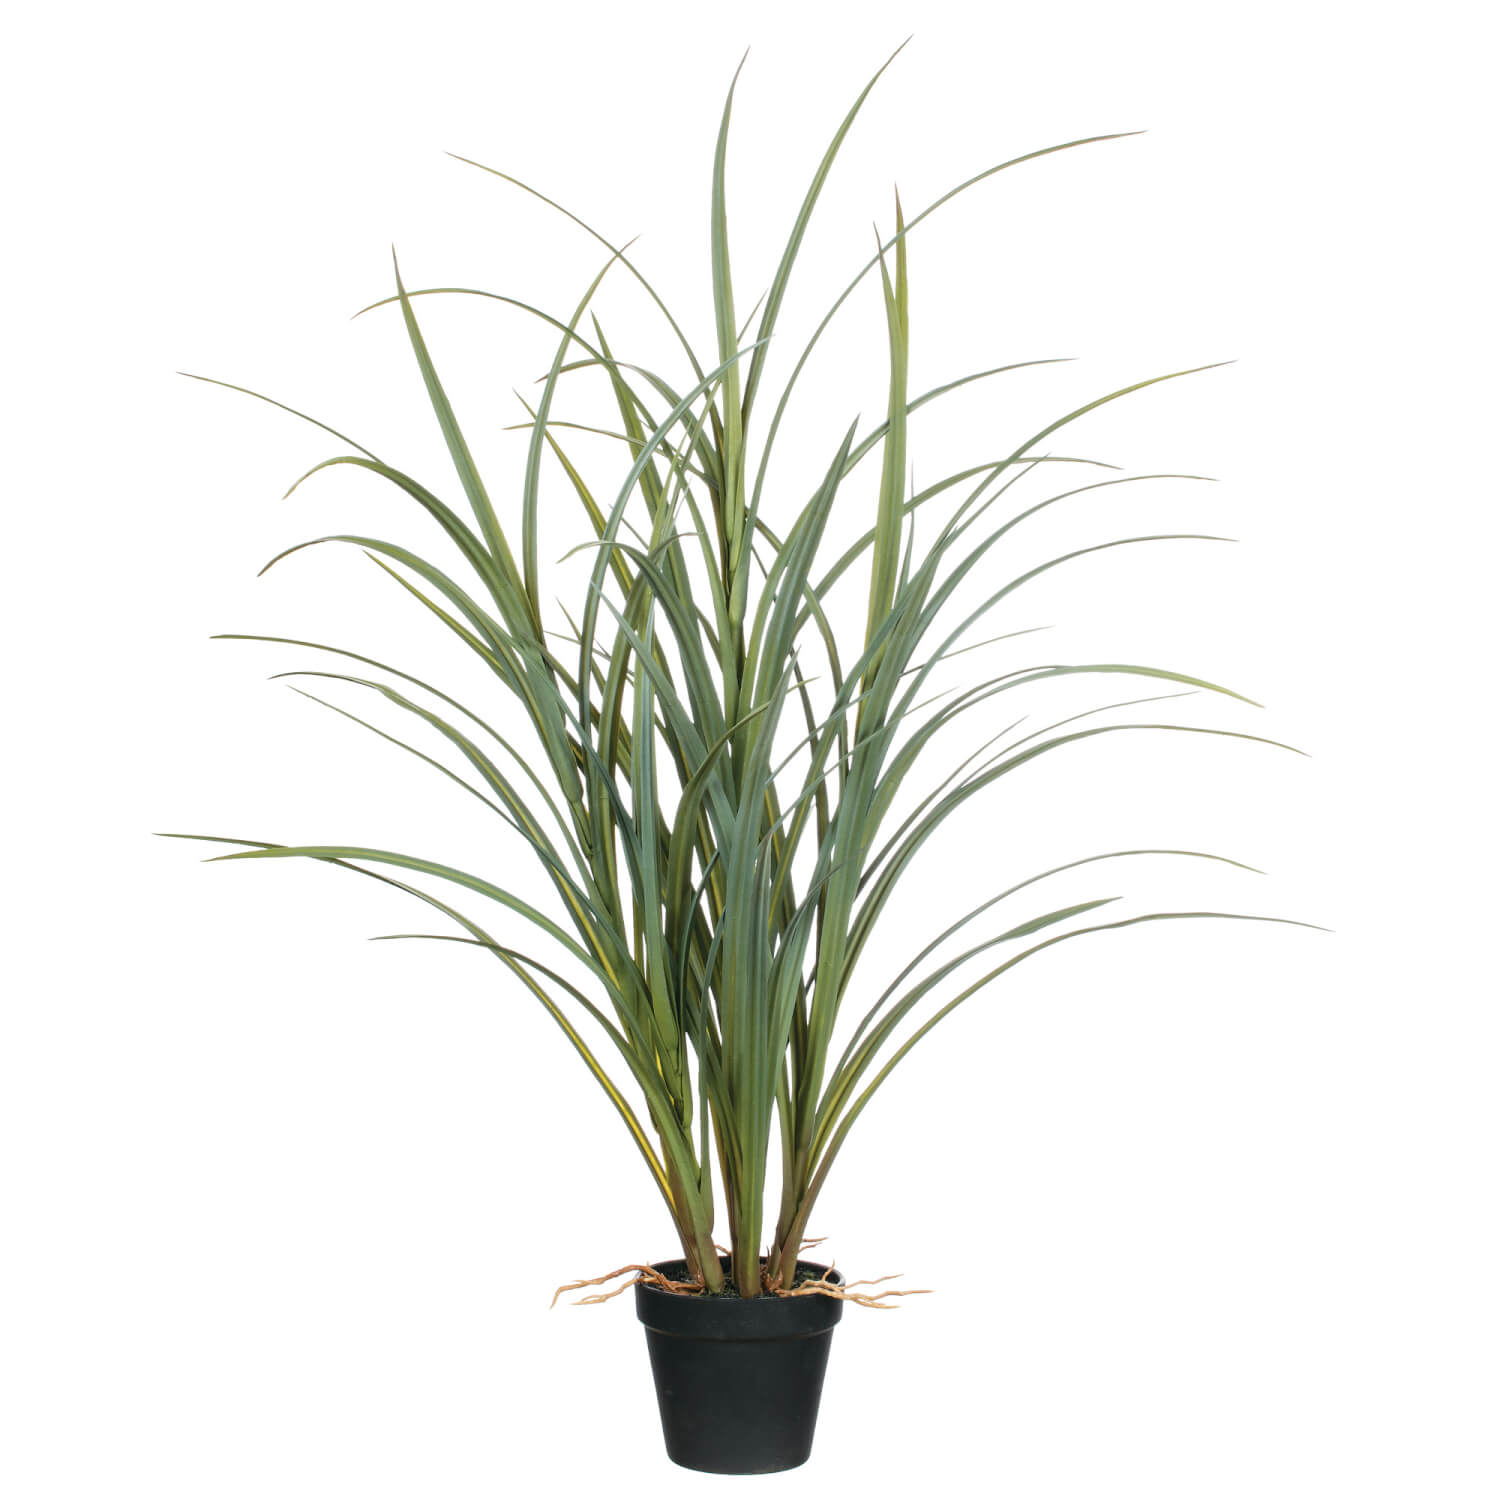 33" POTTED GRASS